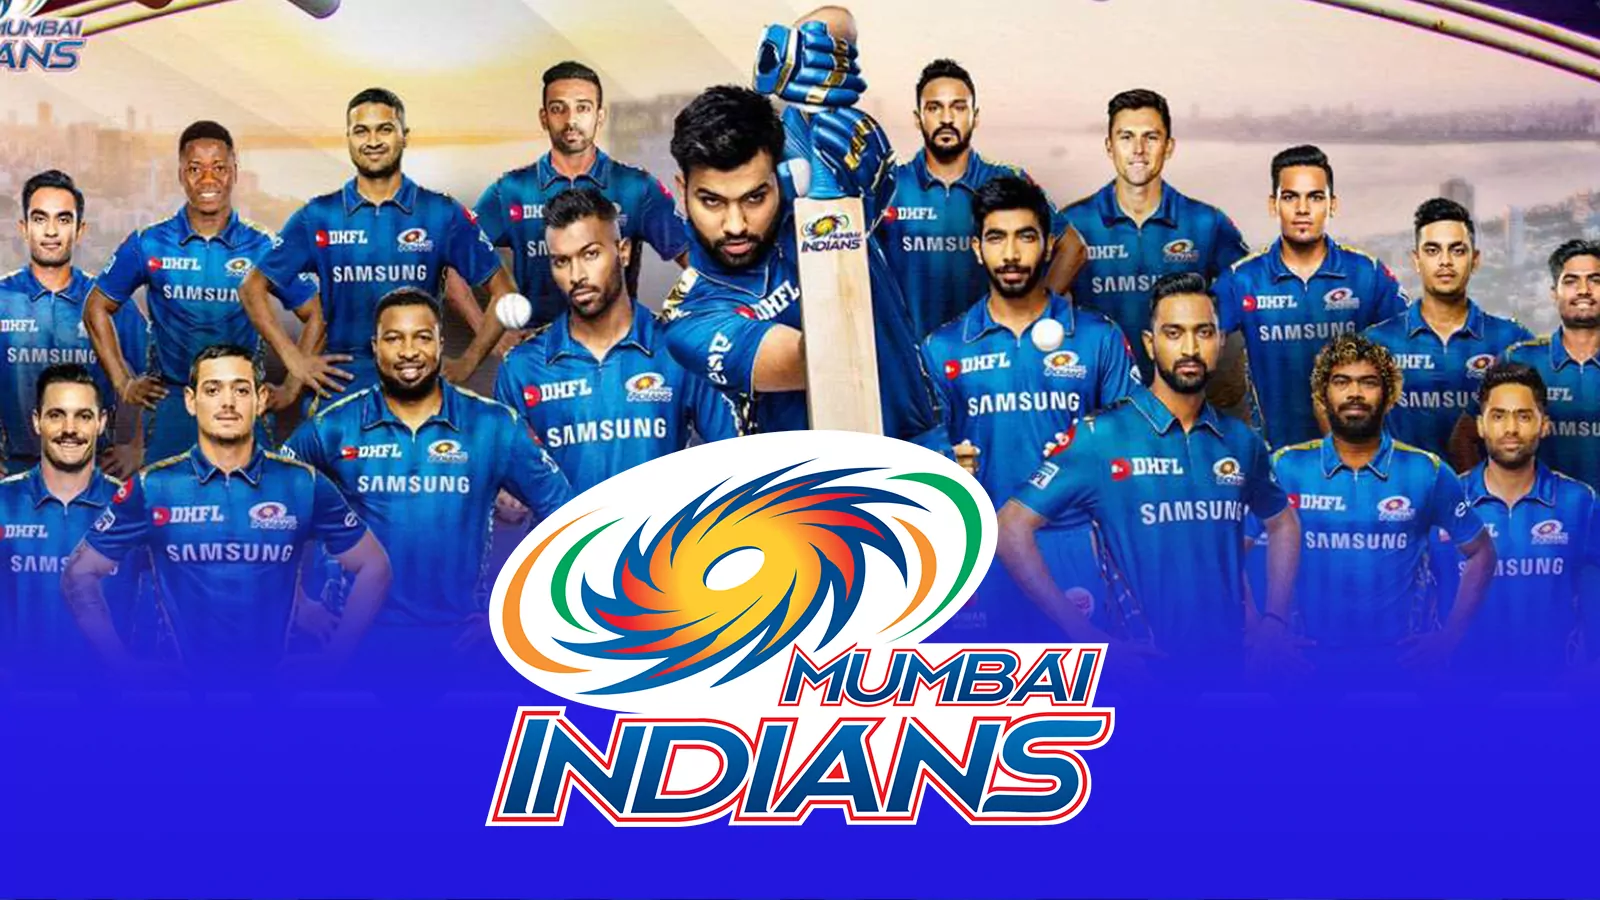 Stay in toush with all the changes, follow the IPL matches and place profitable bets with our IPL cricket betting tips.